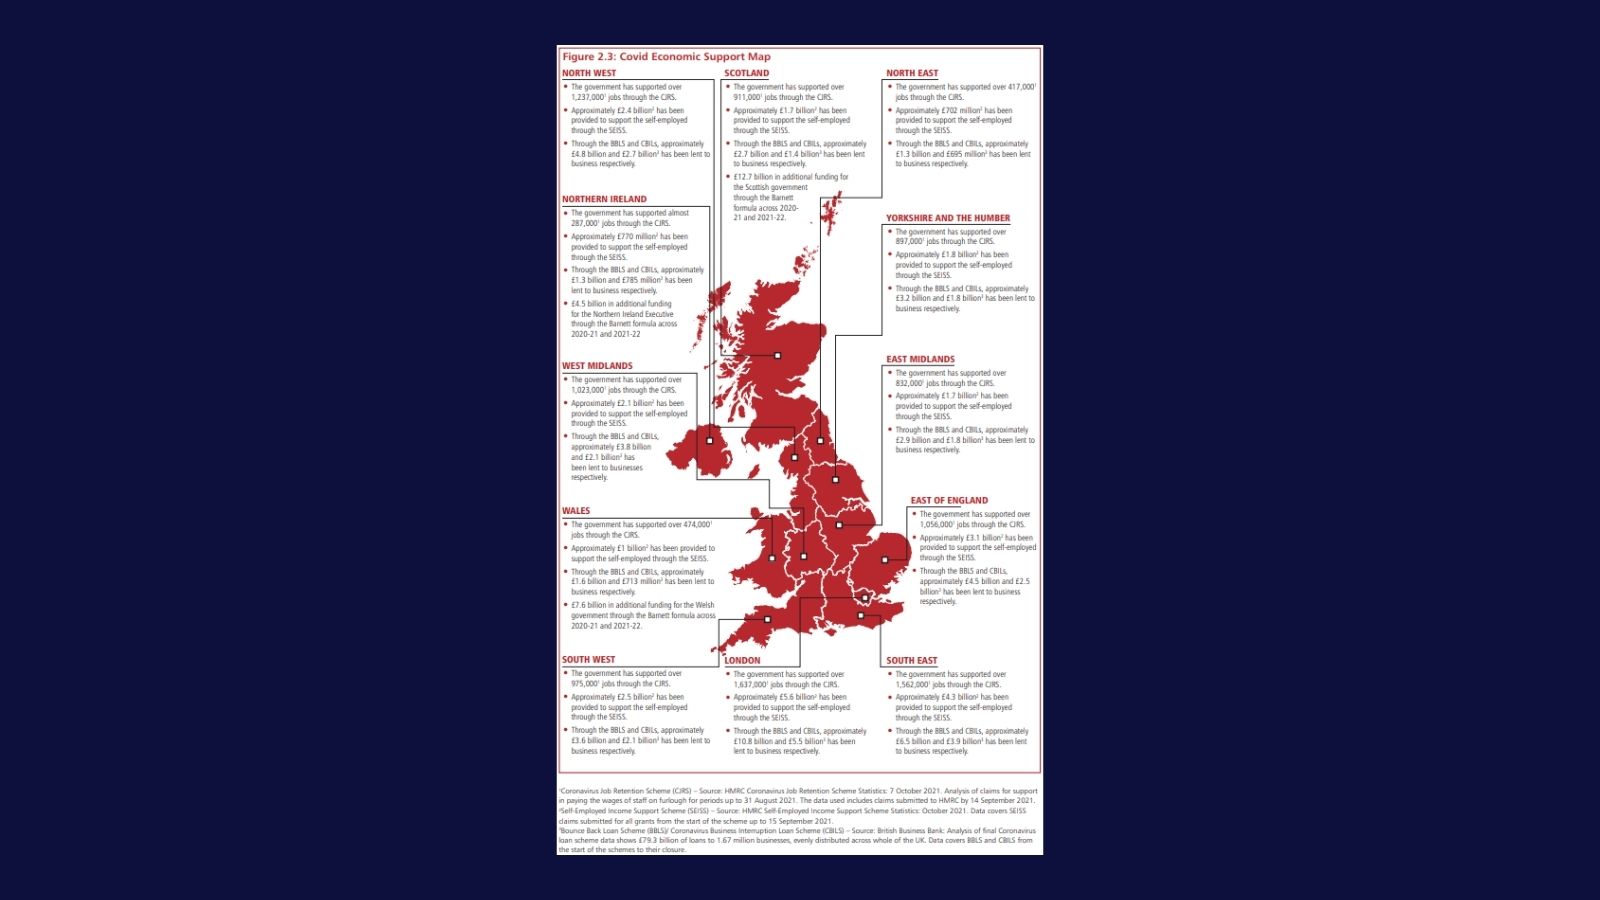 Covid Economic Support Map from supplementary Spending Review fact sheets